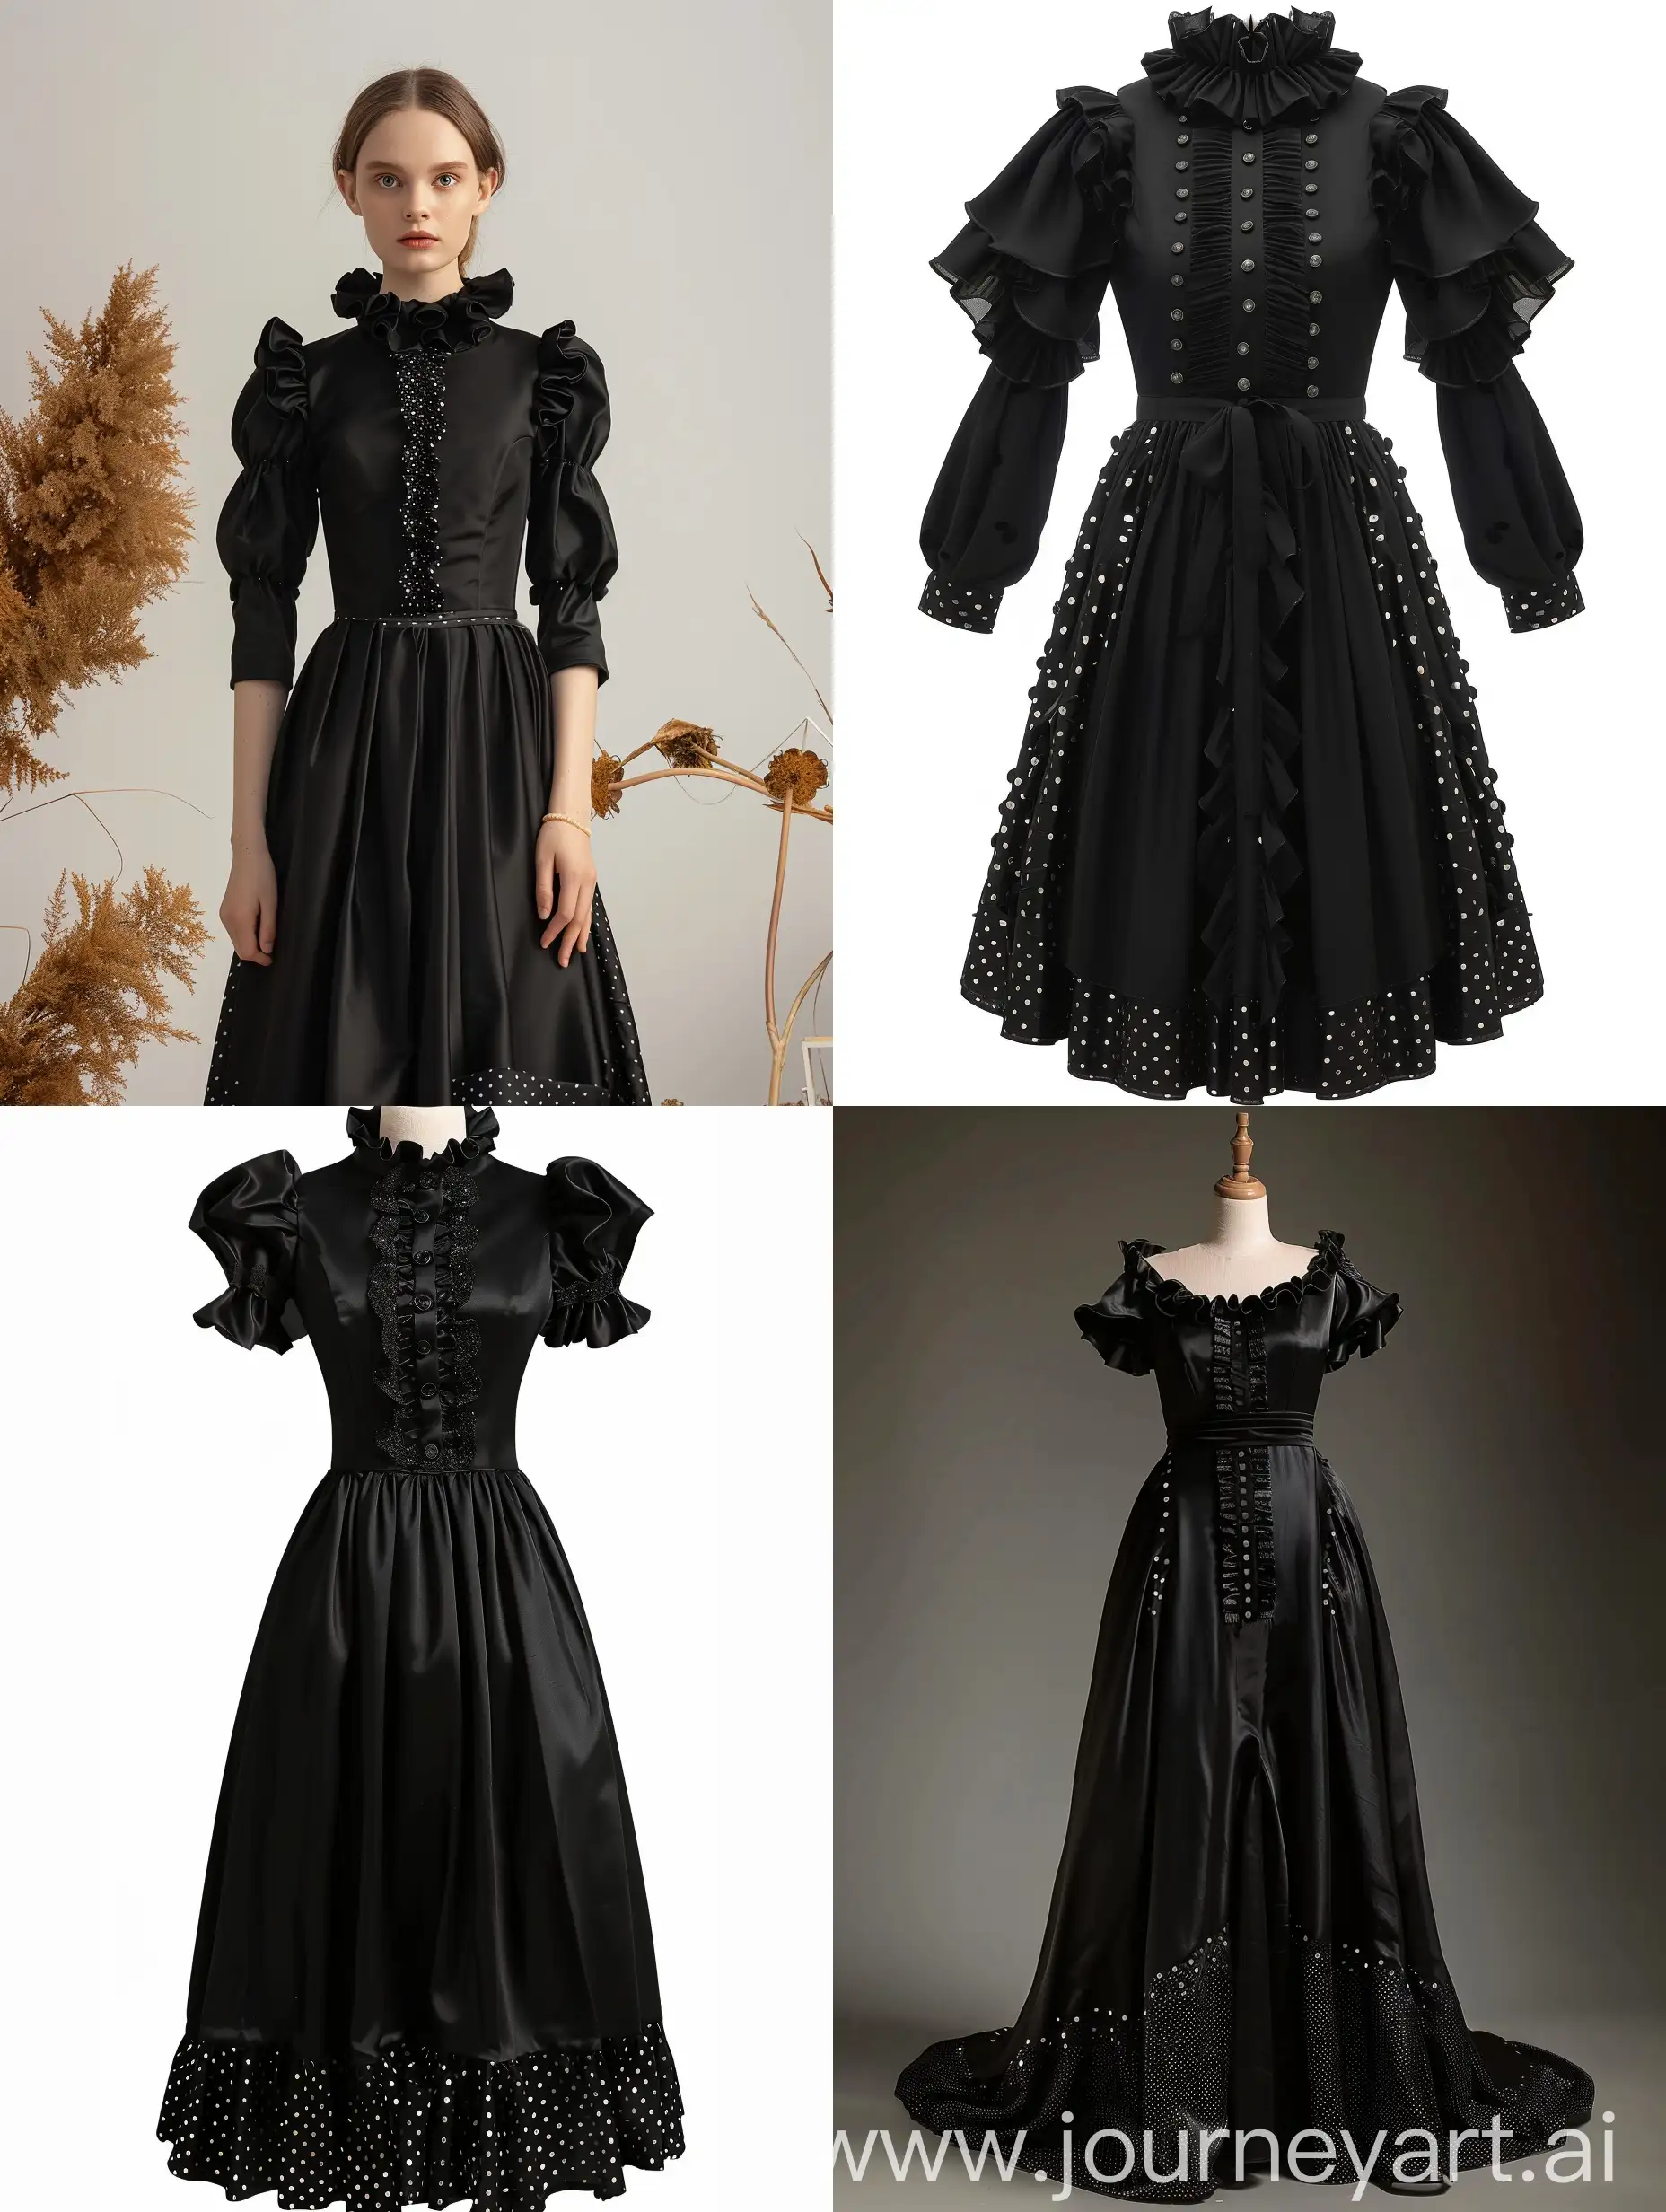 Long black maxi dress with a ruffled collar, 4 fold waist, satin, polka dot down to the knees, 10 centimeter short sleeves on the arms.